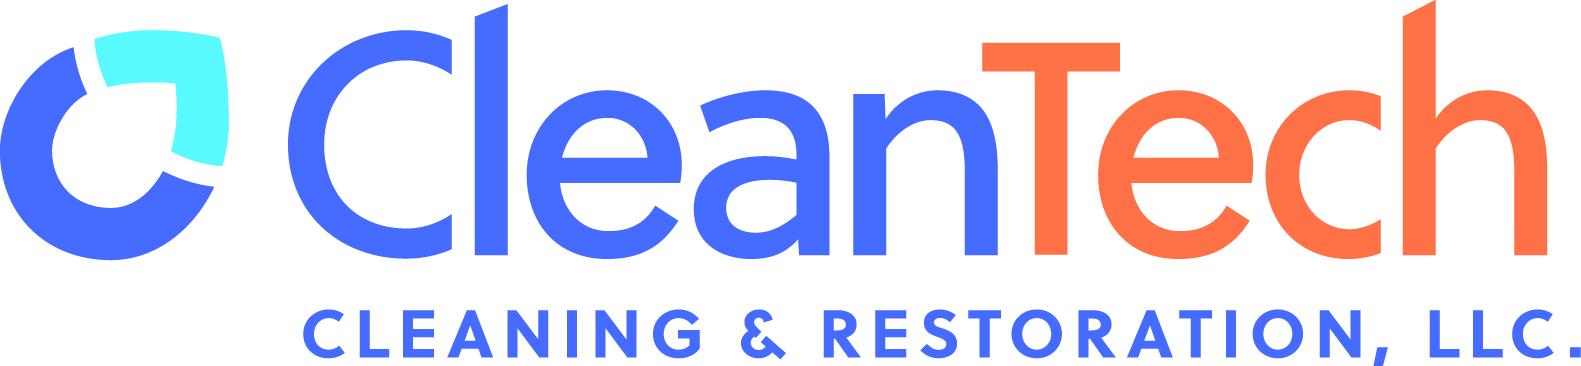 CLEANTECH CLEANING & RESTORATION